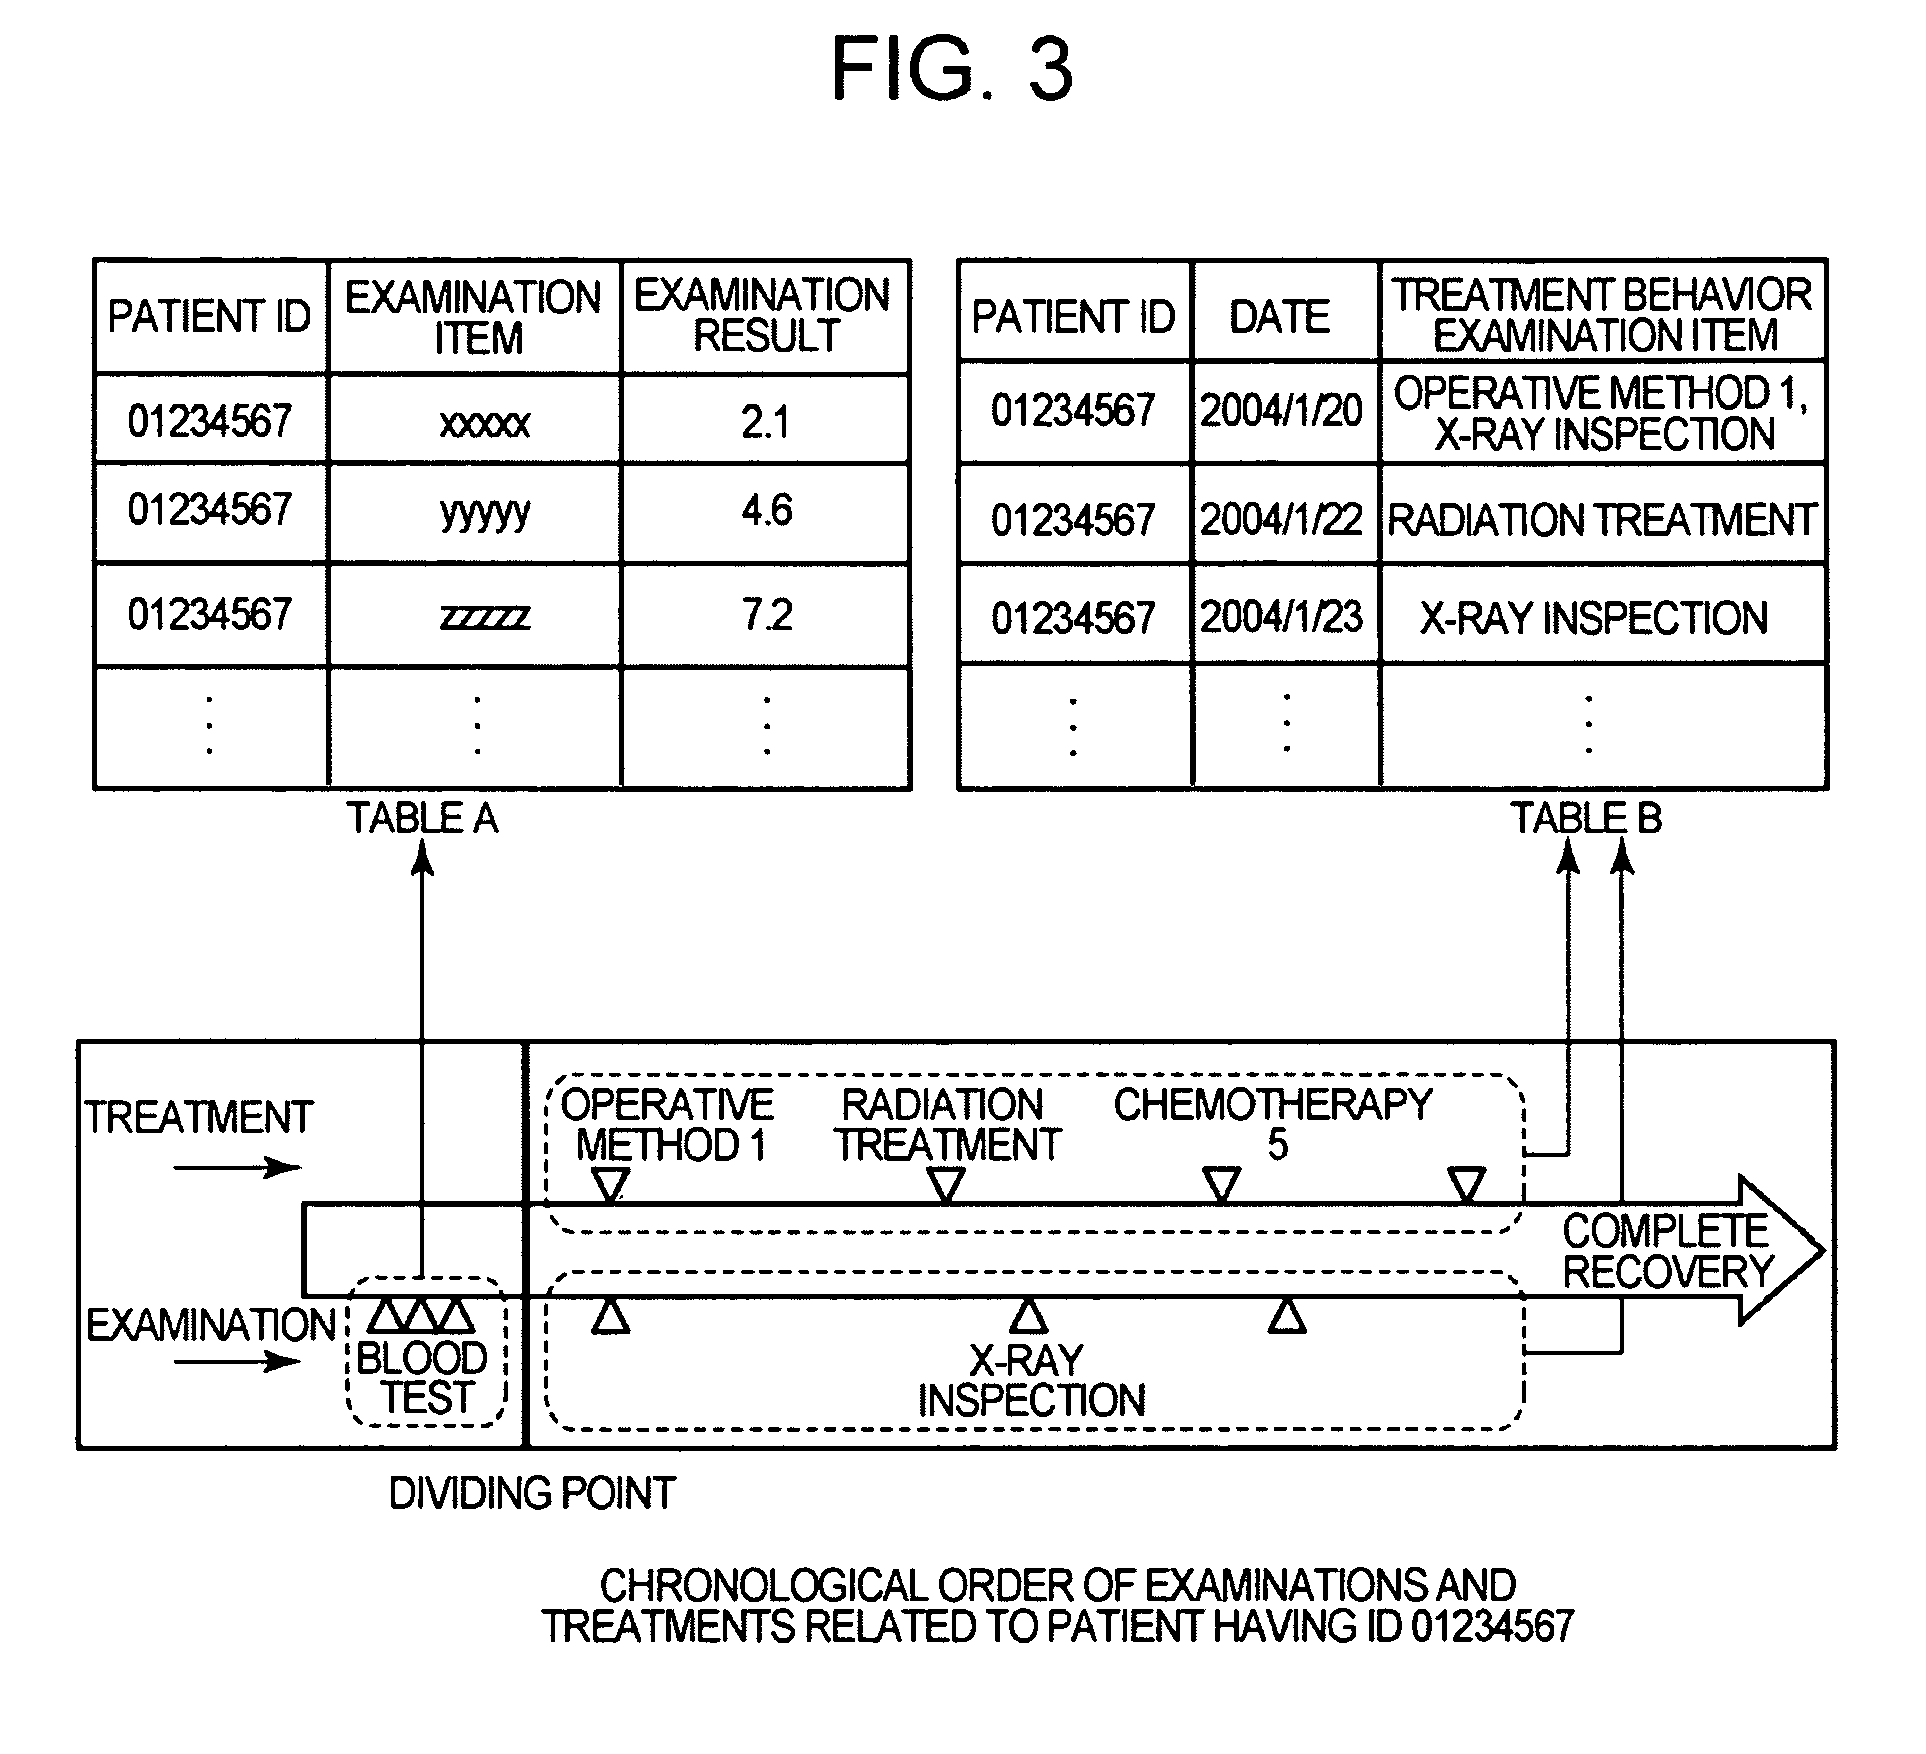 Method for creating medical treatment models from a database of medical records